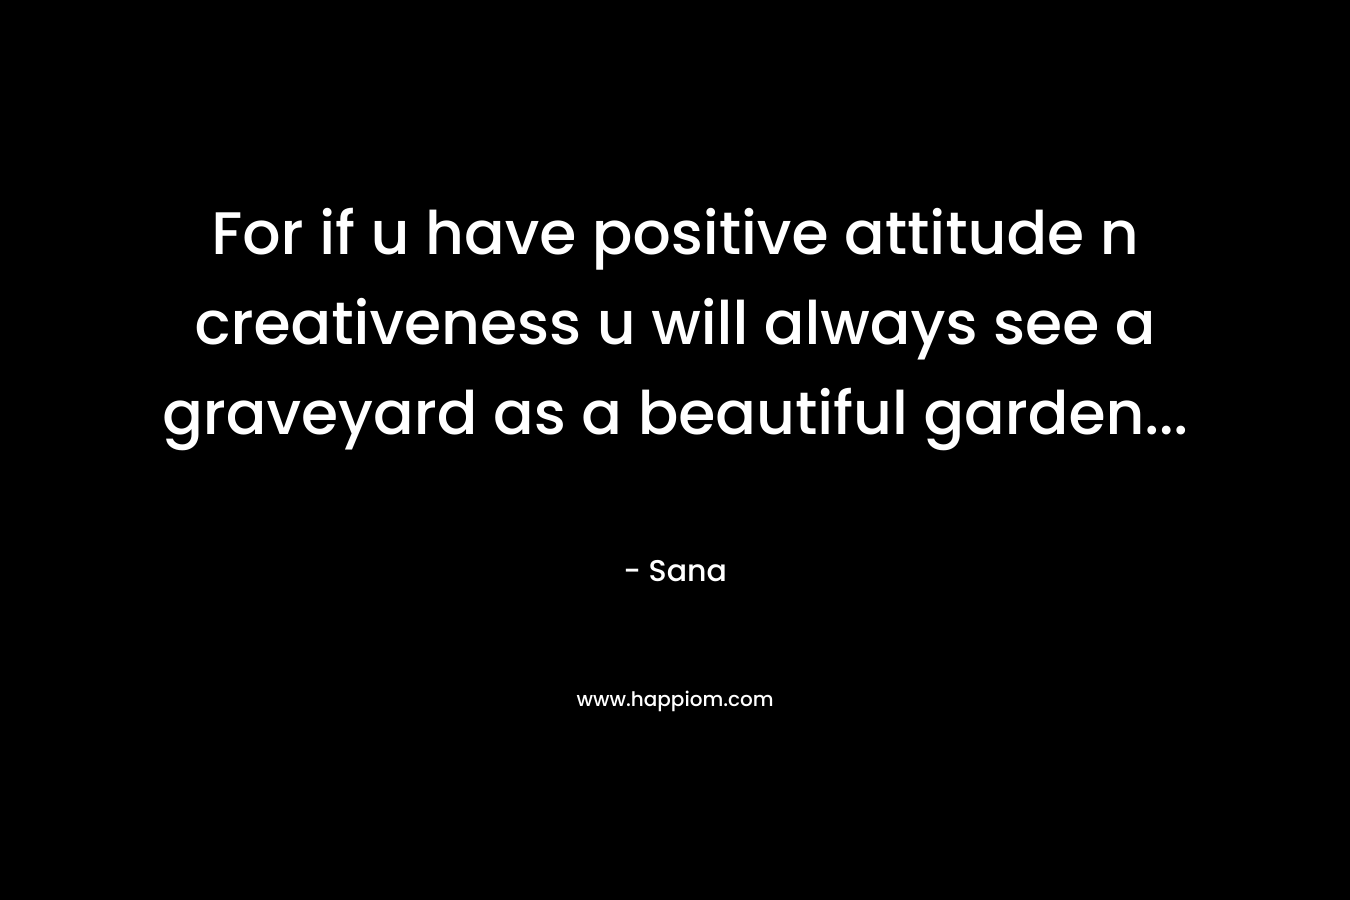 For if u have positive attitude n creativeness u will always see a graveyard as a beautiful garden...